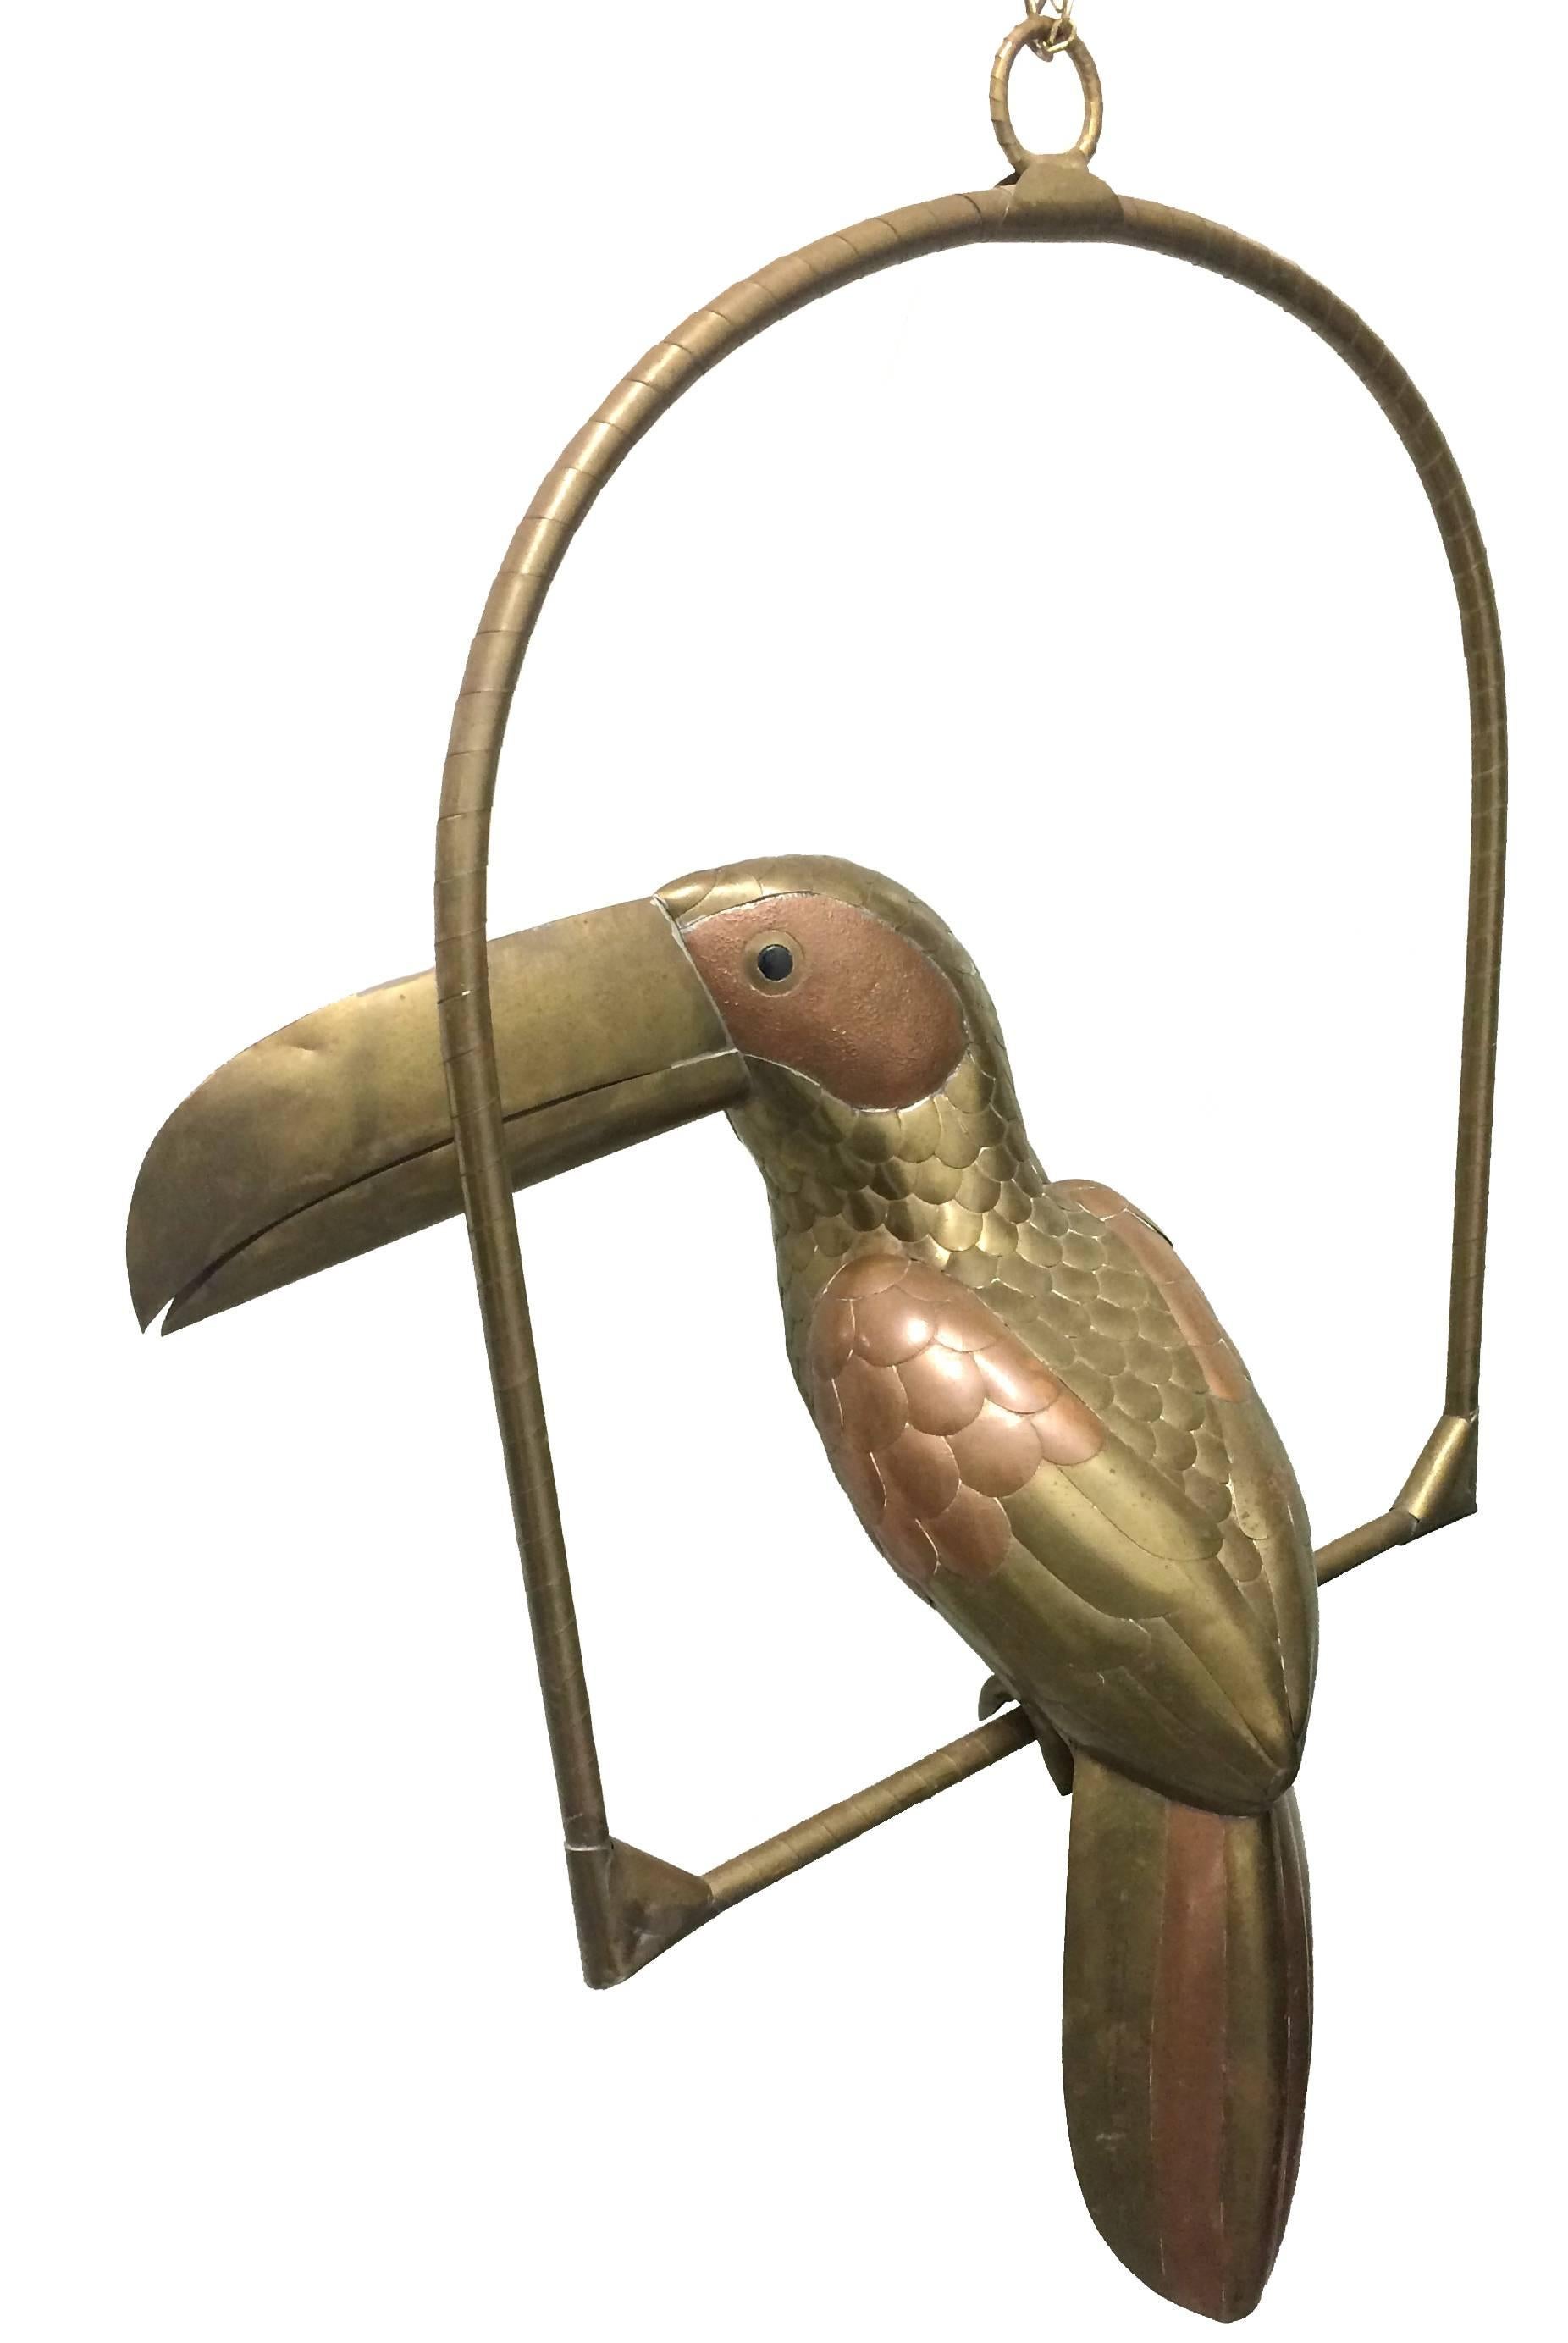 Vintage 1970s copper and brass toucan by Sergio Bustamante. Brass stand with attached hanging chain, 8"L. Stand is 20.5" tall x 17" wide. Unsigned.
